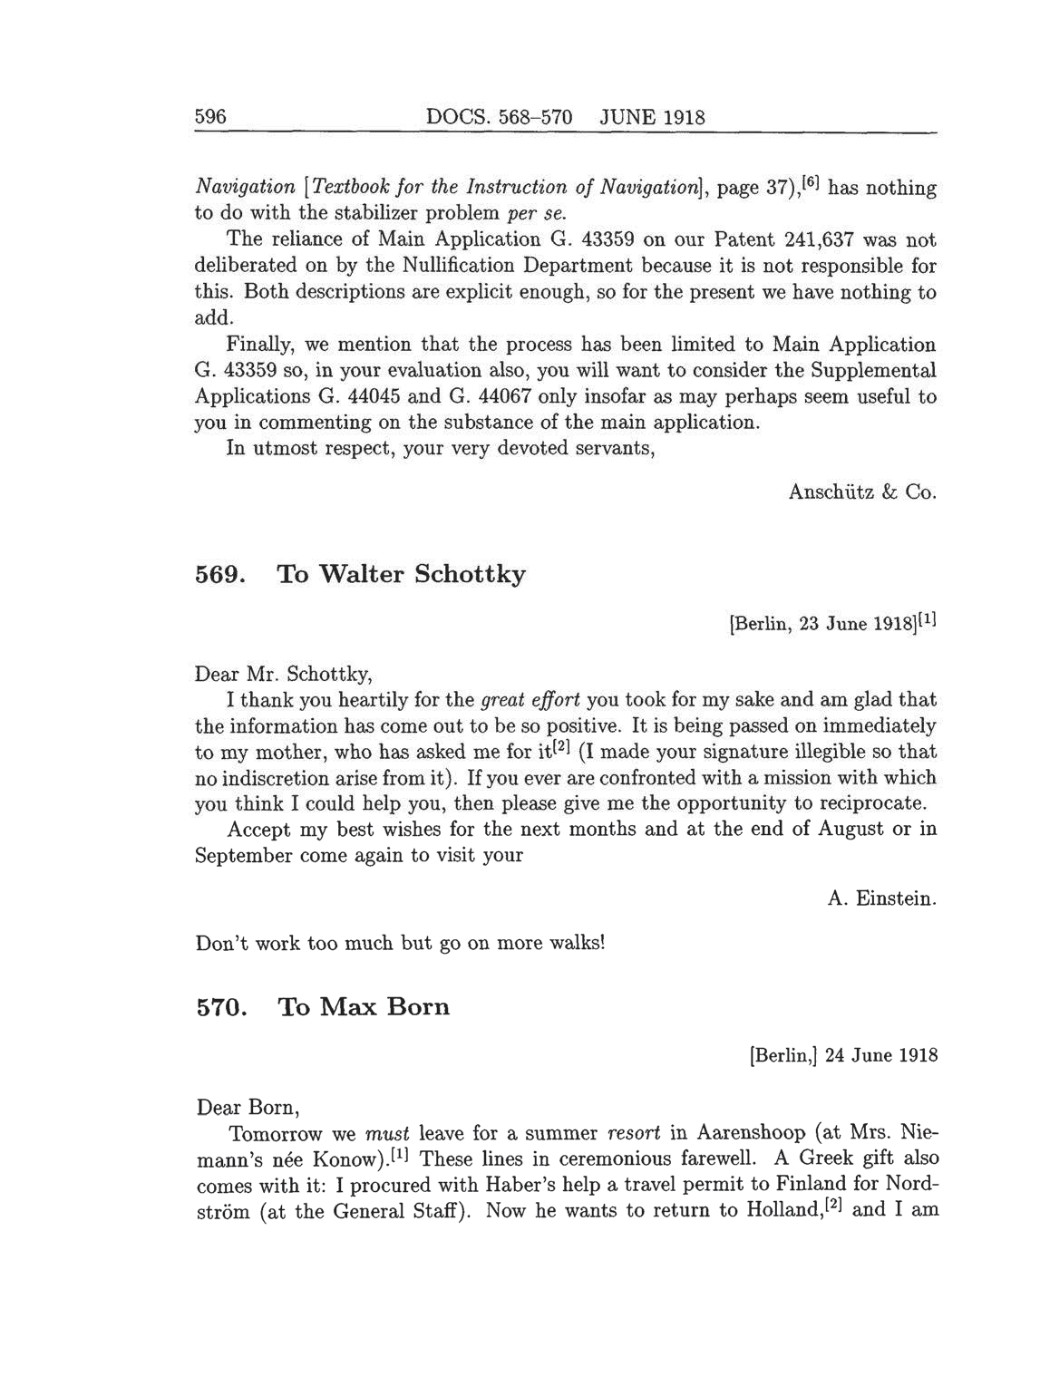 Volume 8: The Berlin Years: Correspondence, 1914-1918 (English translation supplement) page 596